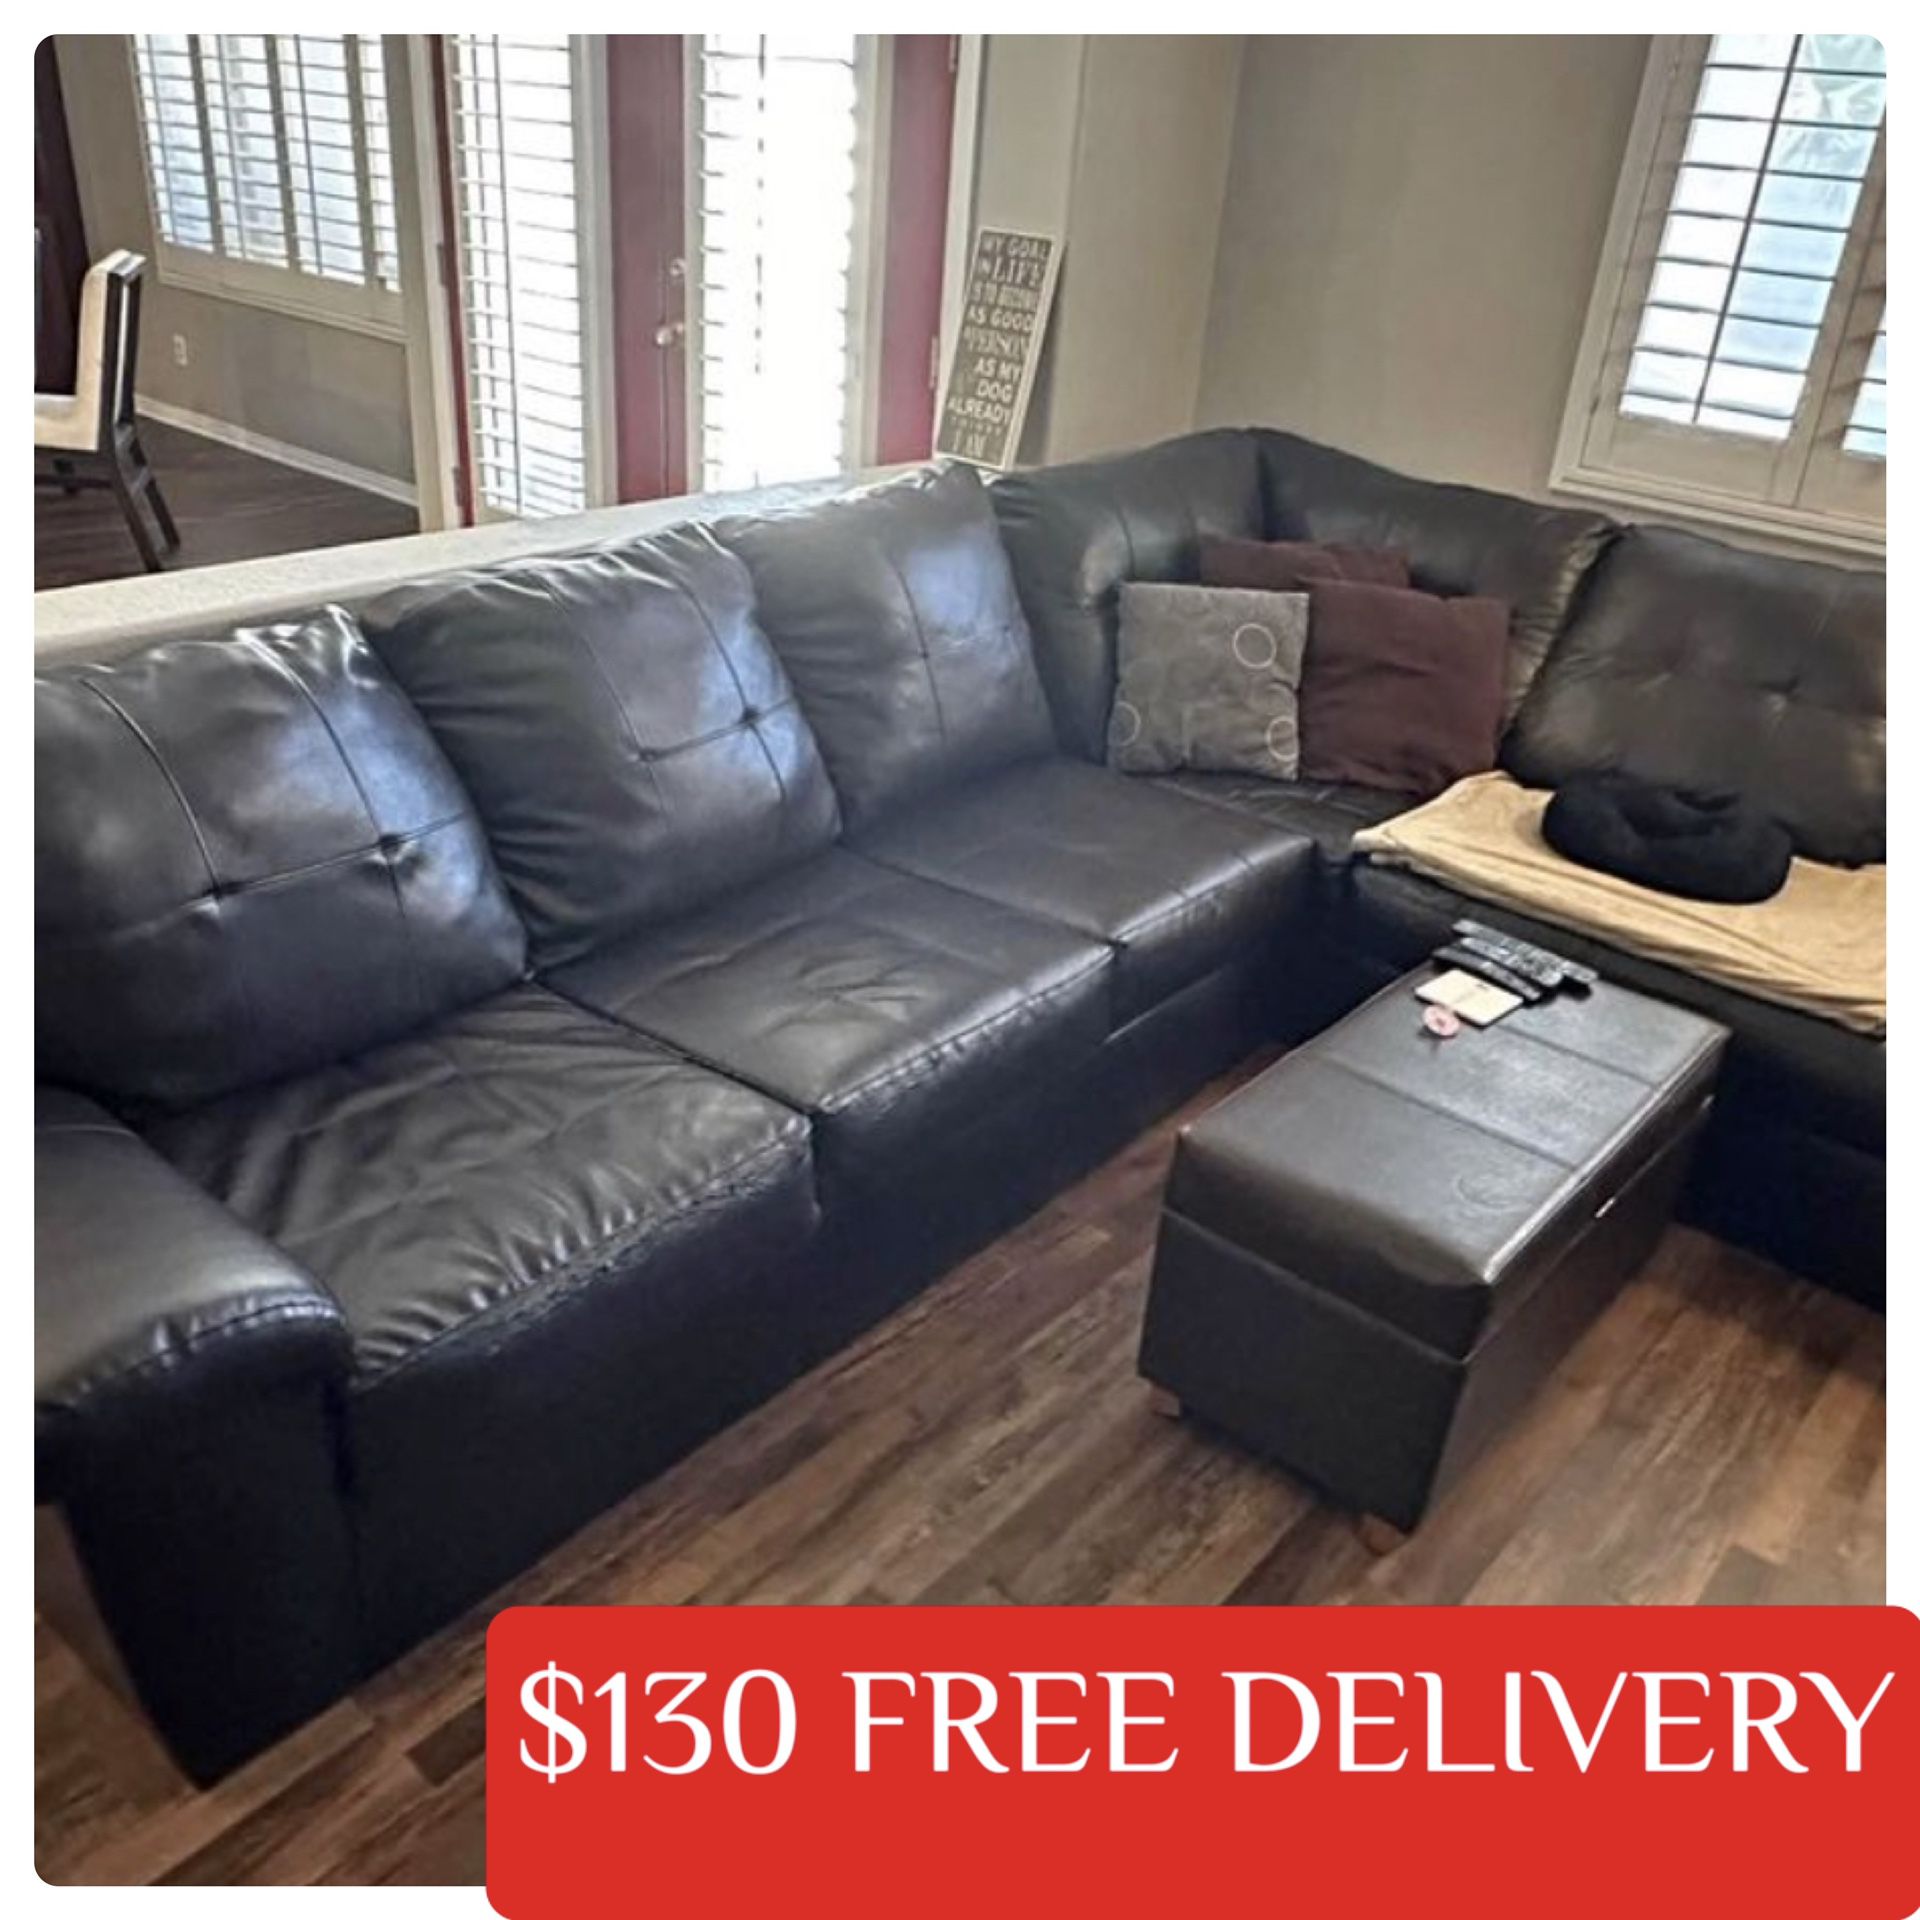 2 Piece Leather SECTIONAL couch sofa recliner (FREE CURBSIDE DELIVERY) 